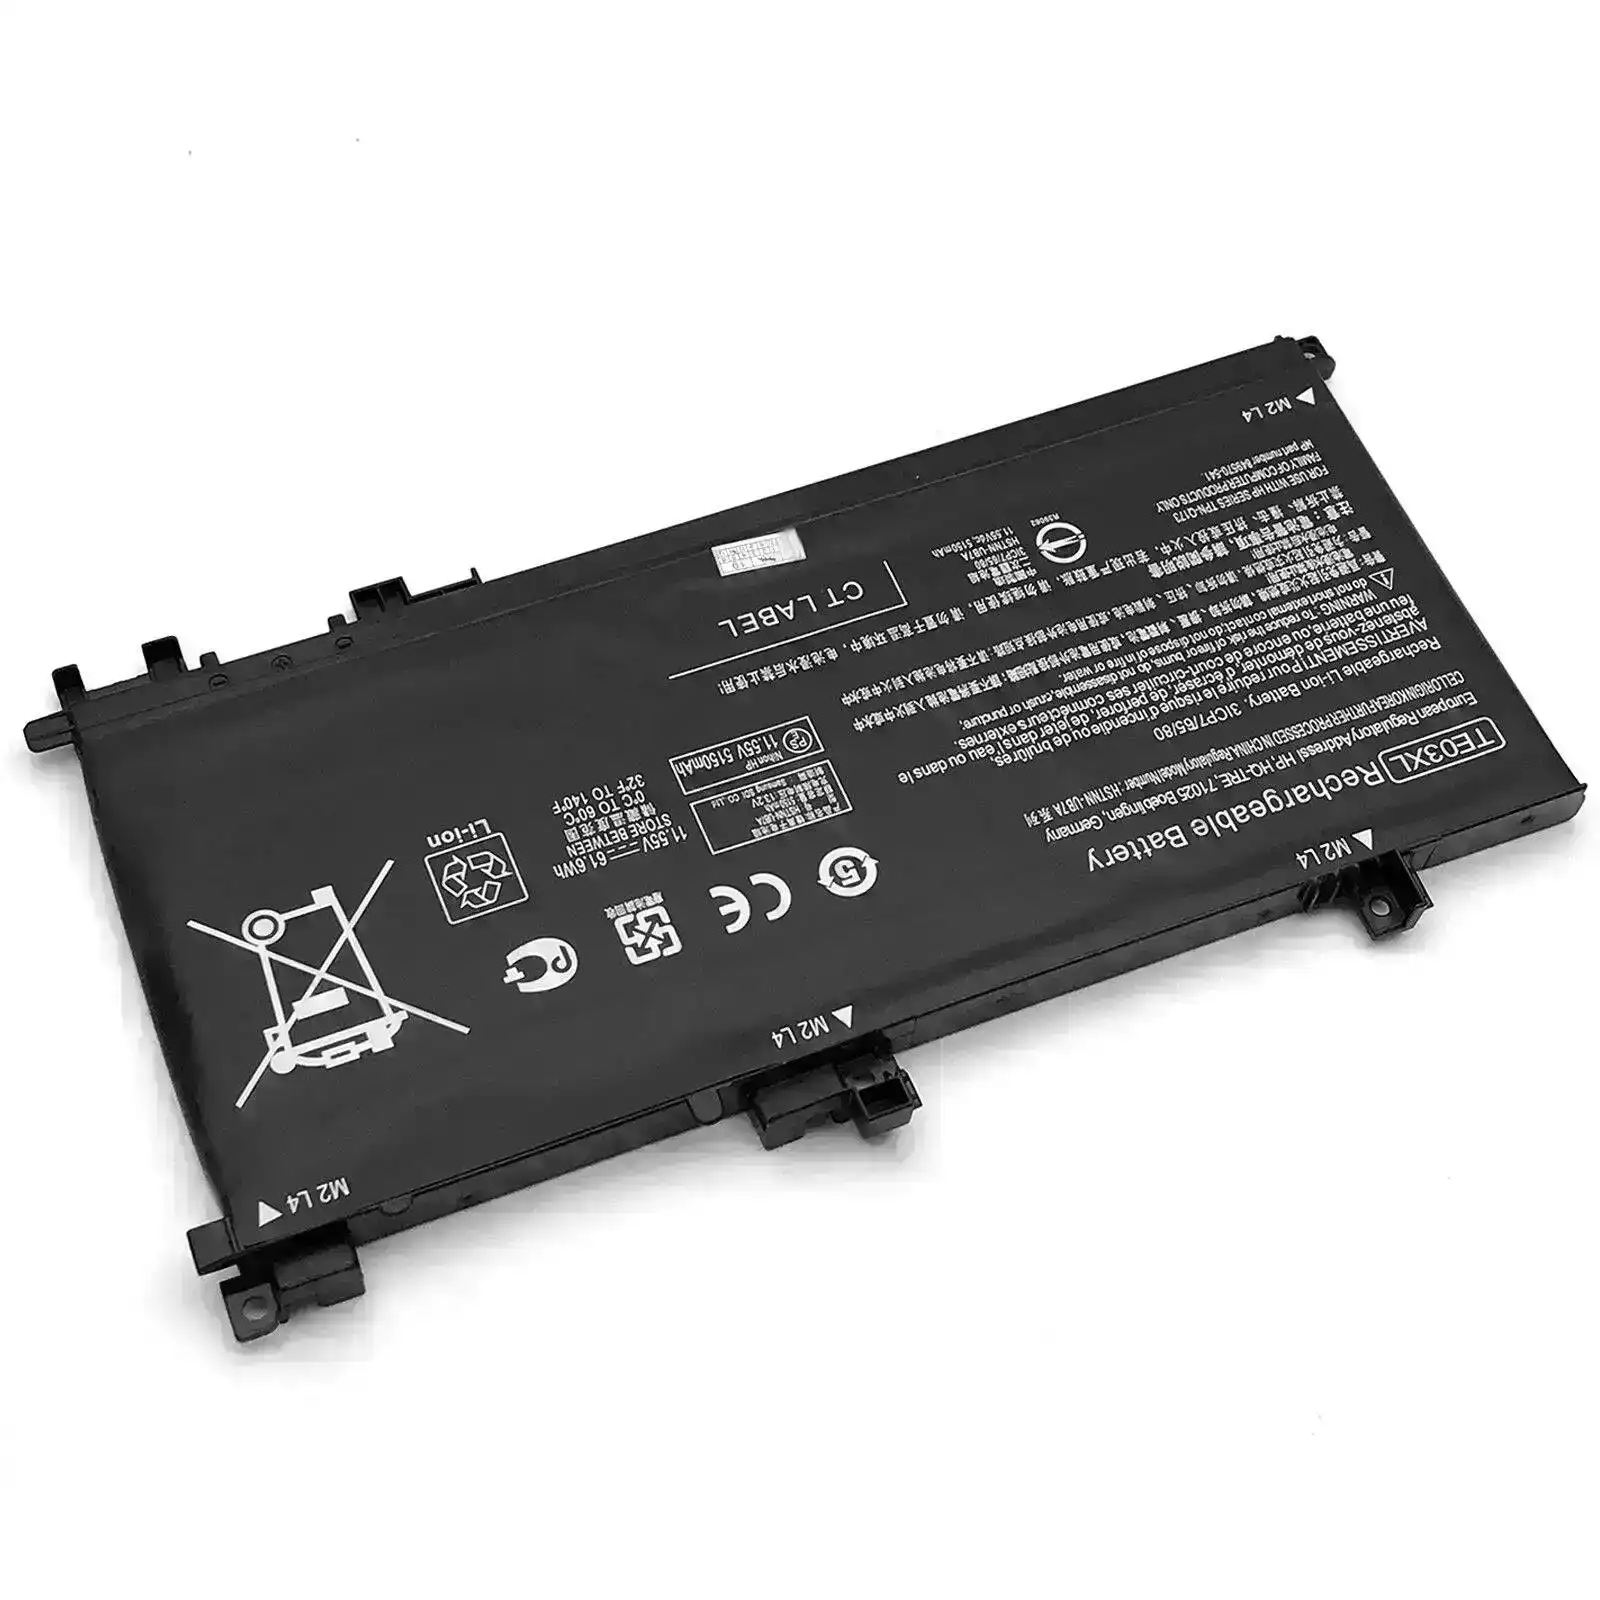 TE03XL Battery Replacement For HP Pavilion 15 BC Series Omen 15 AX Series HSTNN-UB7A 61.6Wh